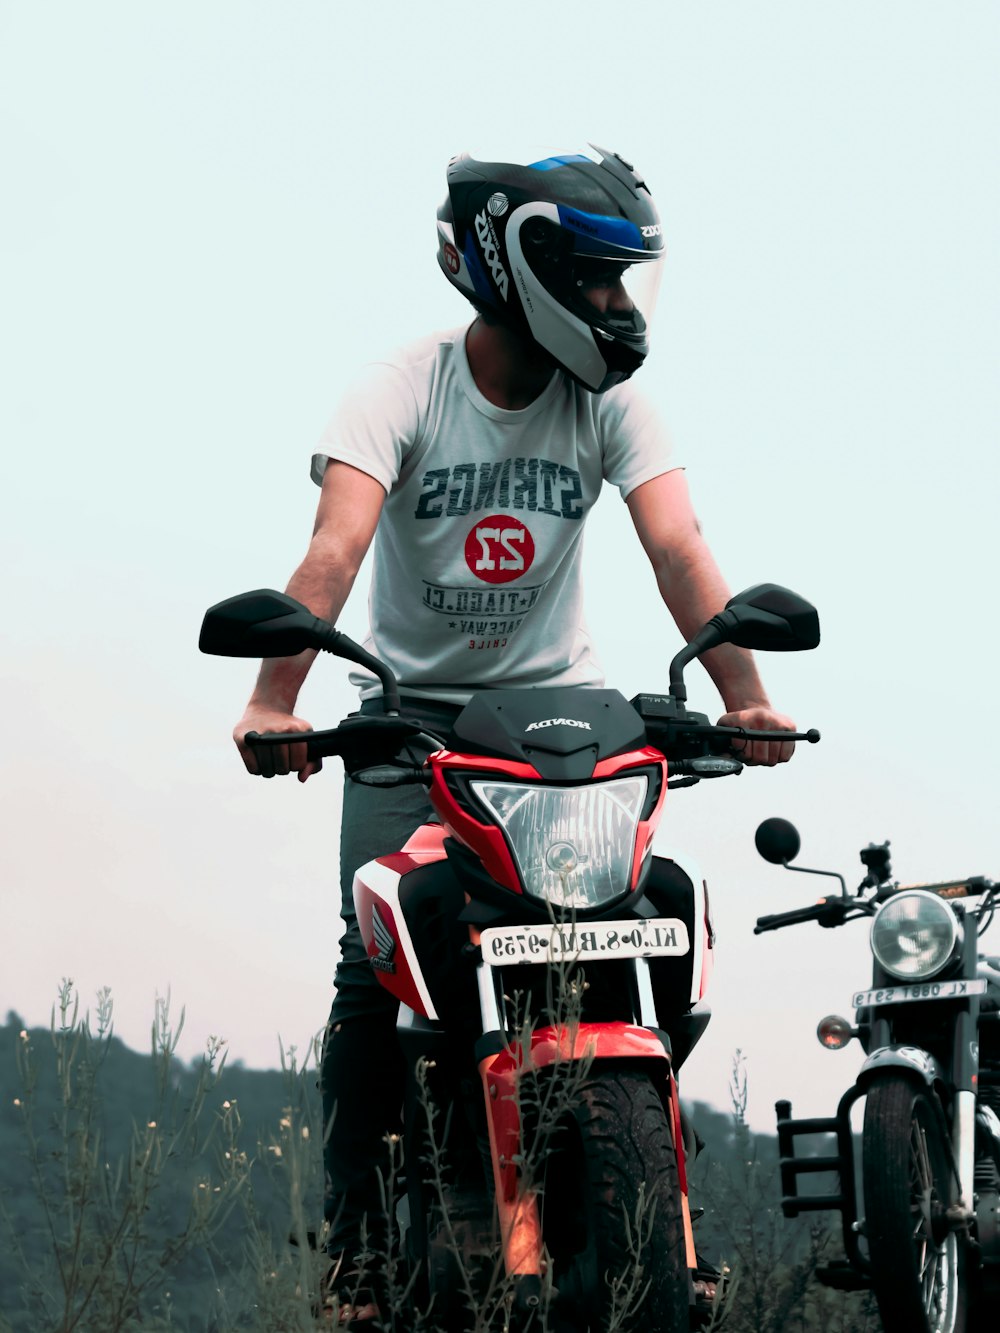 man in white and red crew neck t-shirt riding red and black motorcycle